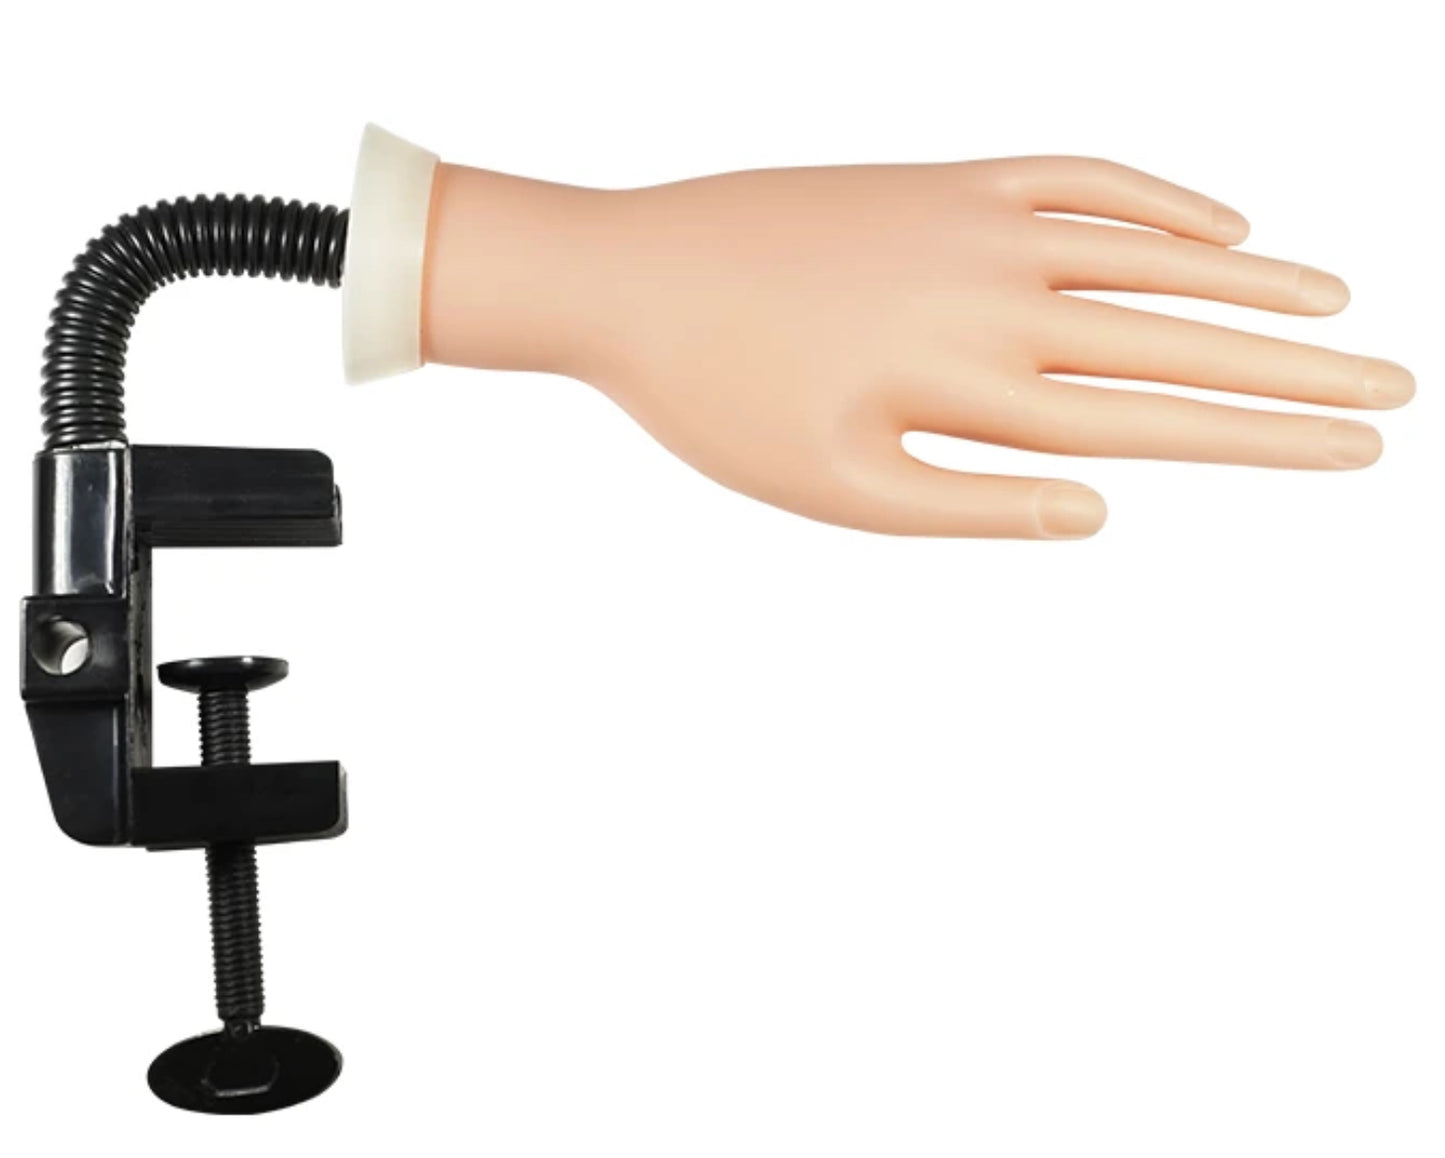 Soft Tabletop Practice Hand with Short Counter Clamp - Premier Nail Supply 